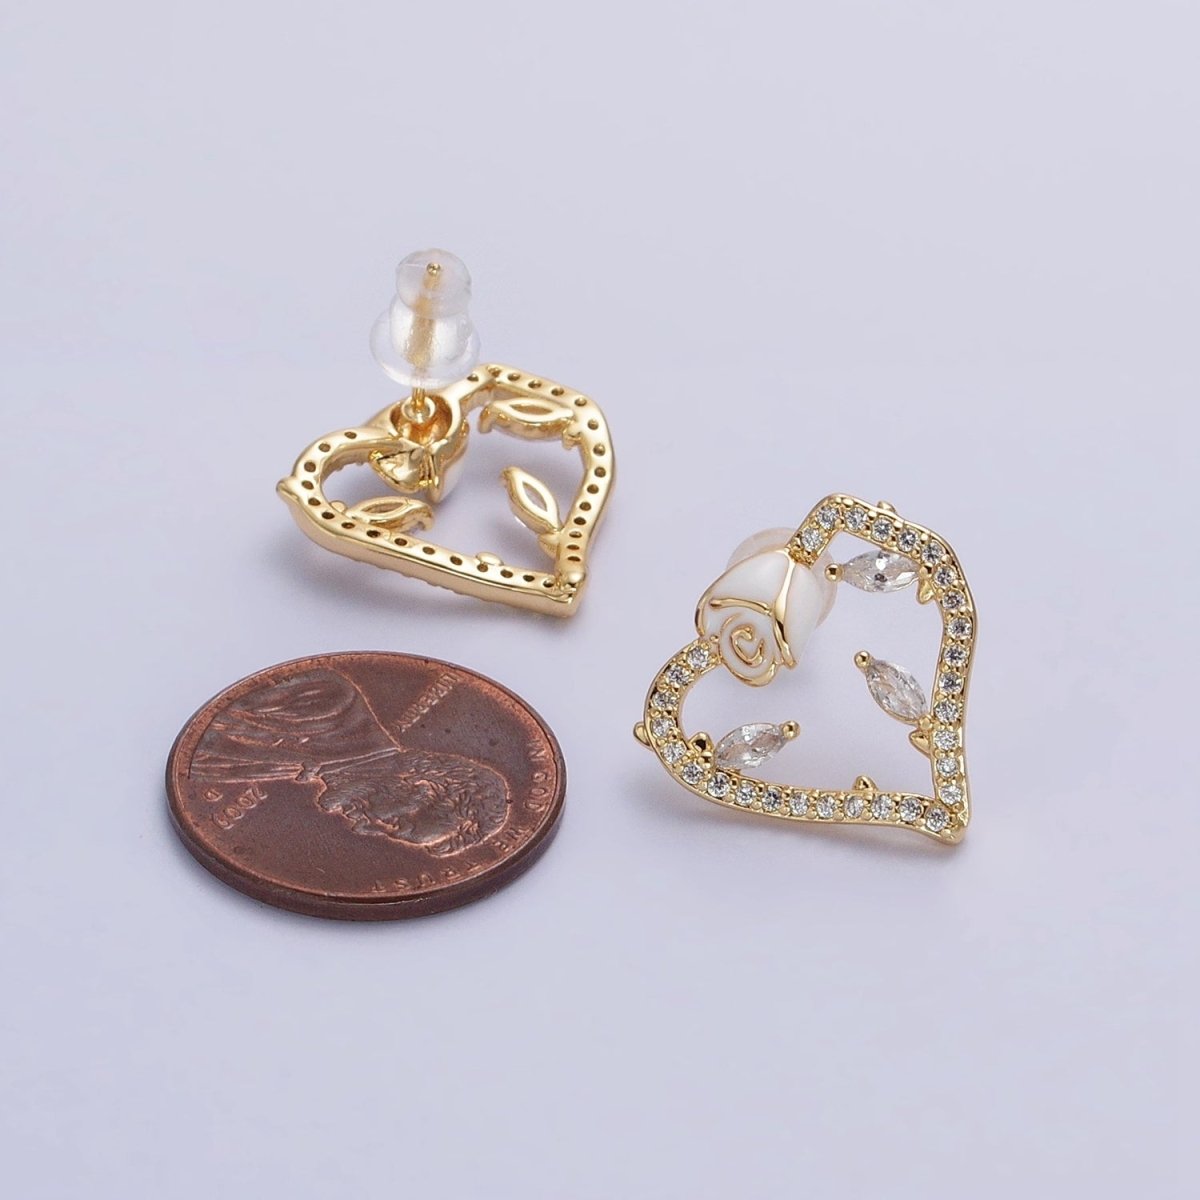 Gold, Silver Micro Paved CZ Geometric Heart White Rose Flower Stud Earrings | AB599 AB600 - DLUXCA